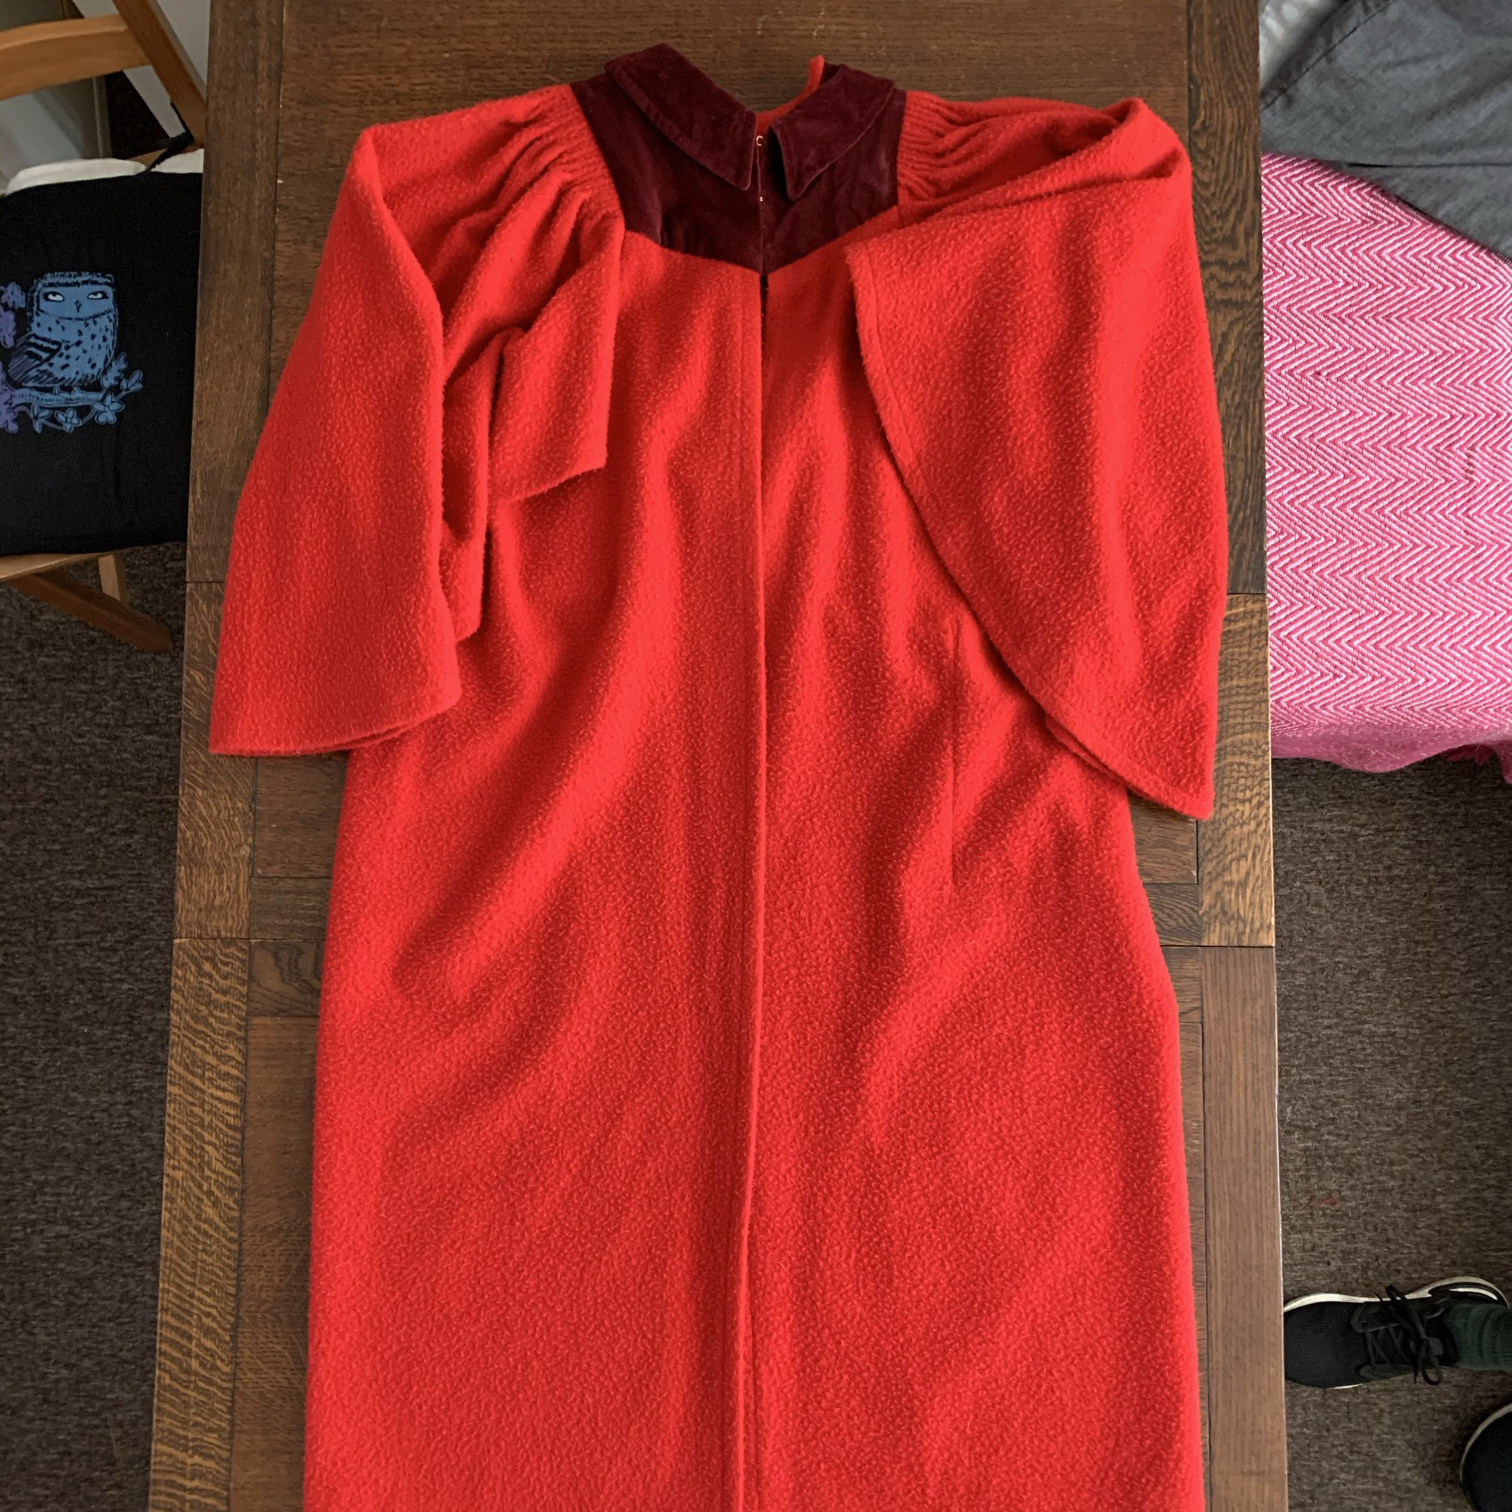 The Red Gown: Reflections on the In/Visibility of Menstruation in Scotland